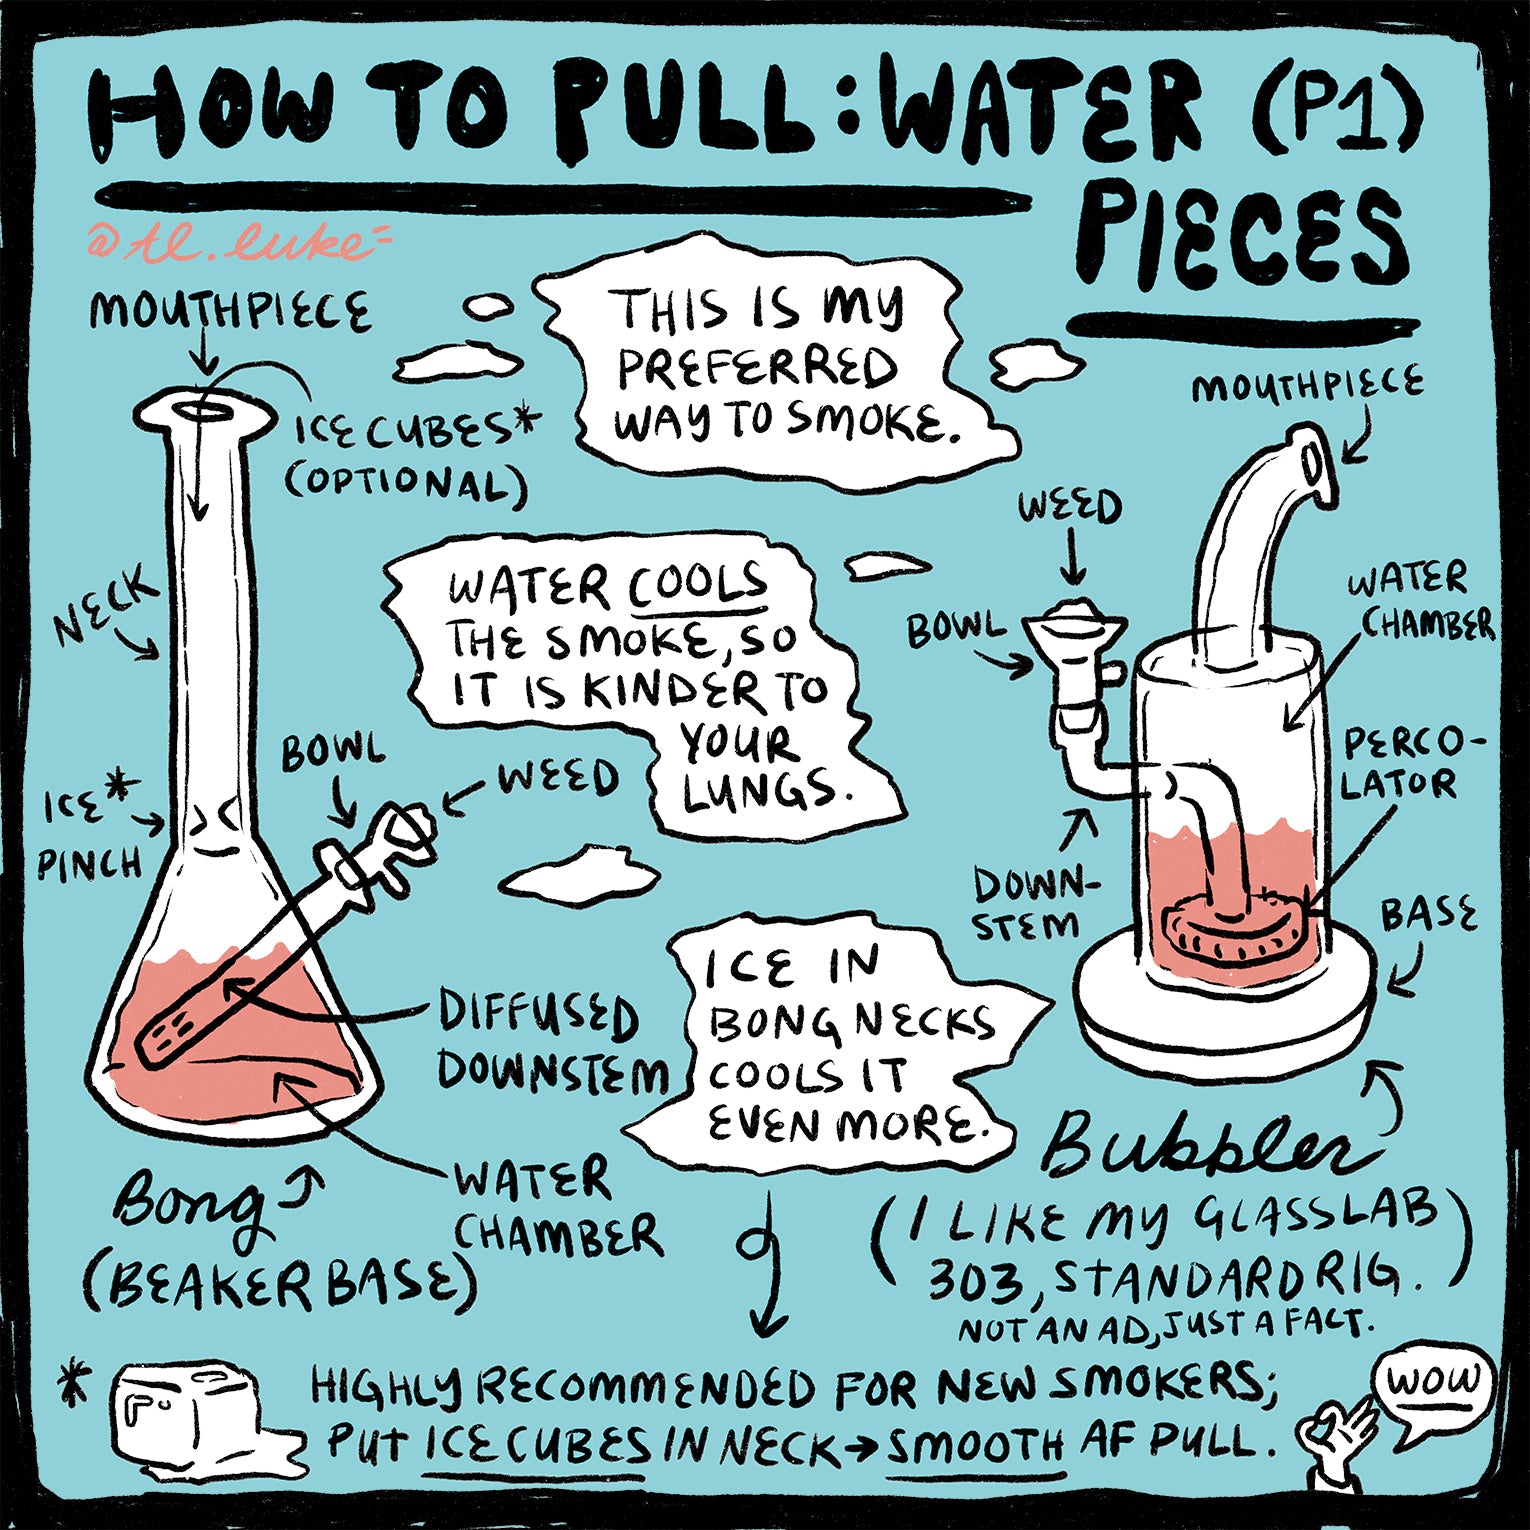 Auntie Luke's Stoner Guide, How to Pull: Water Pieces P1